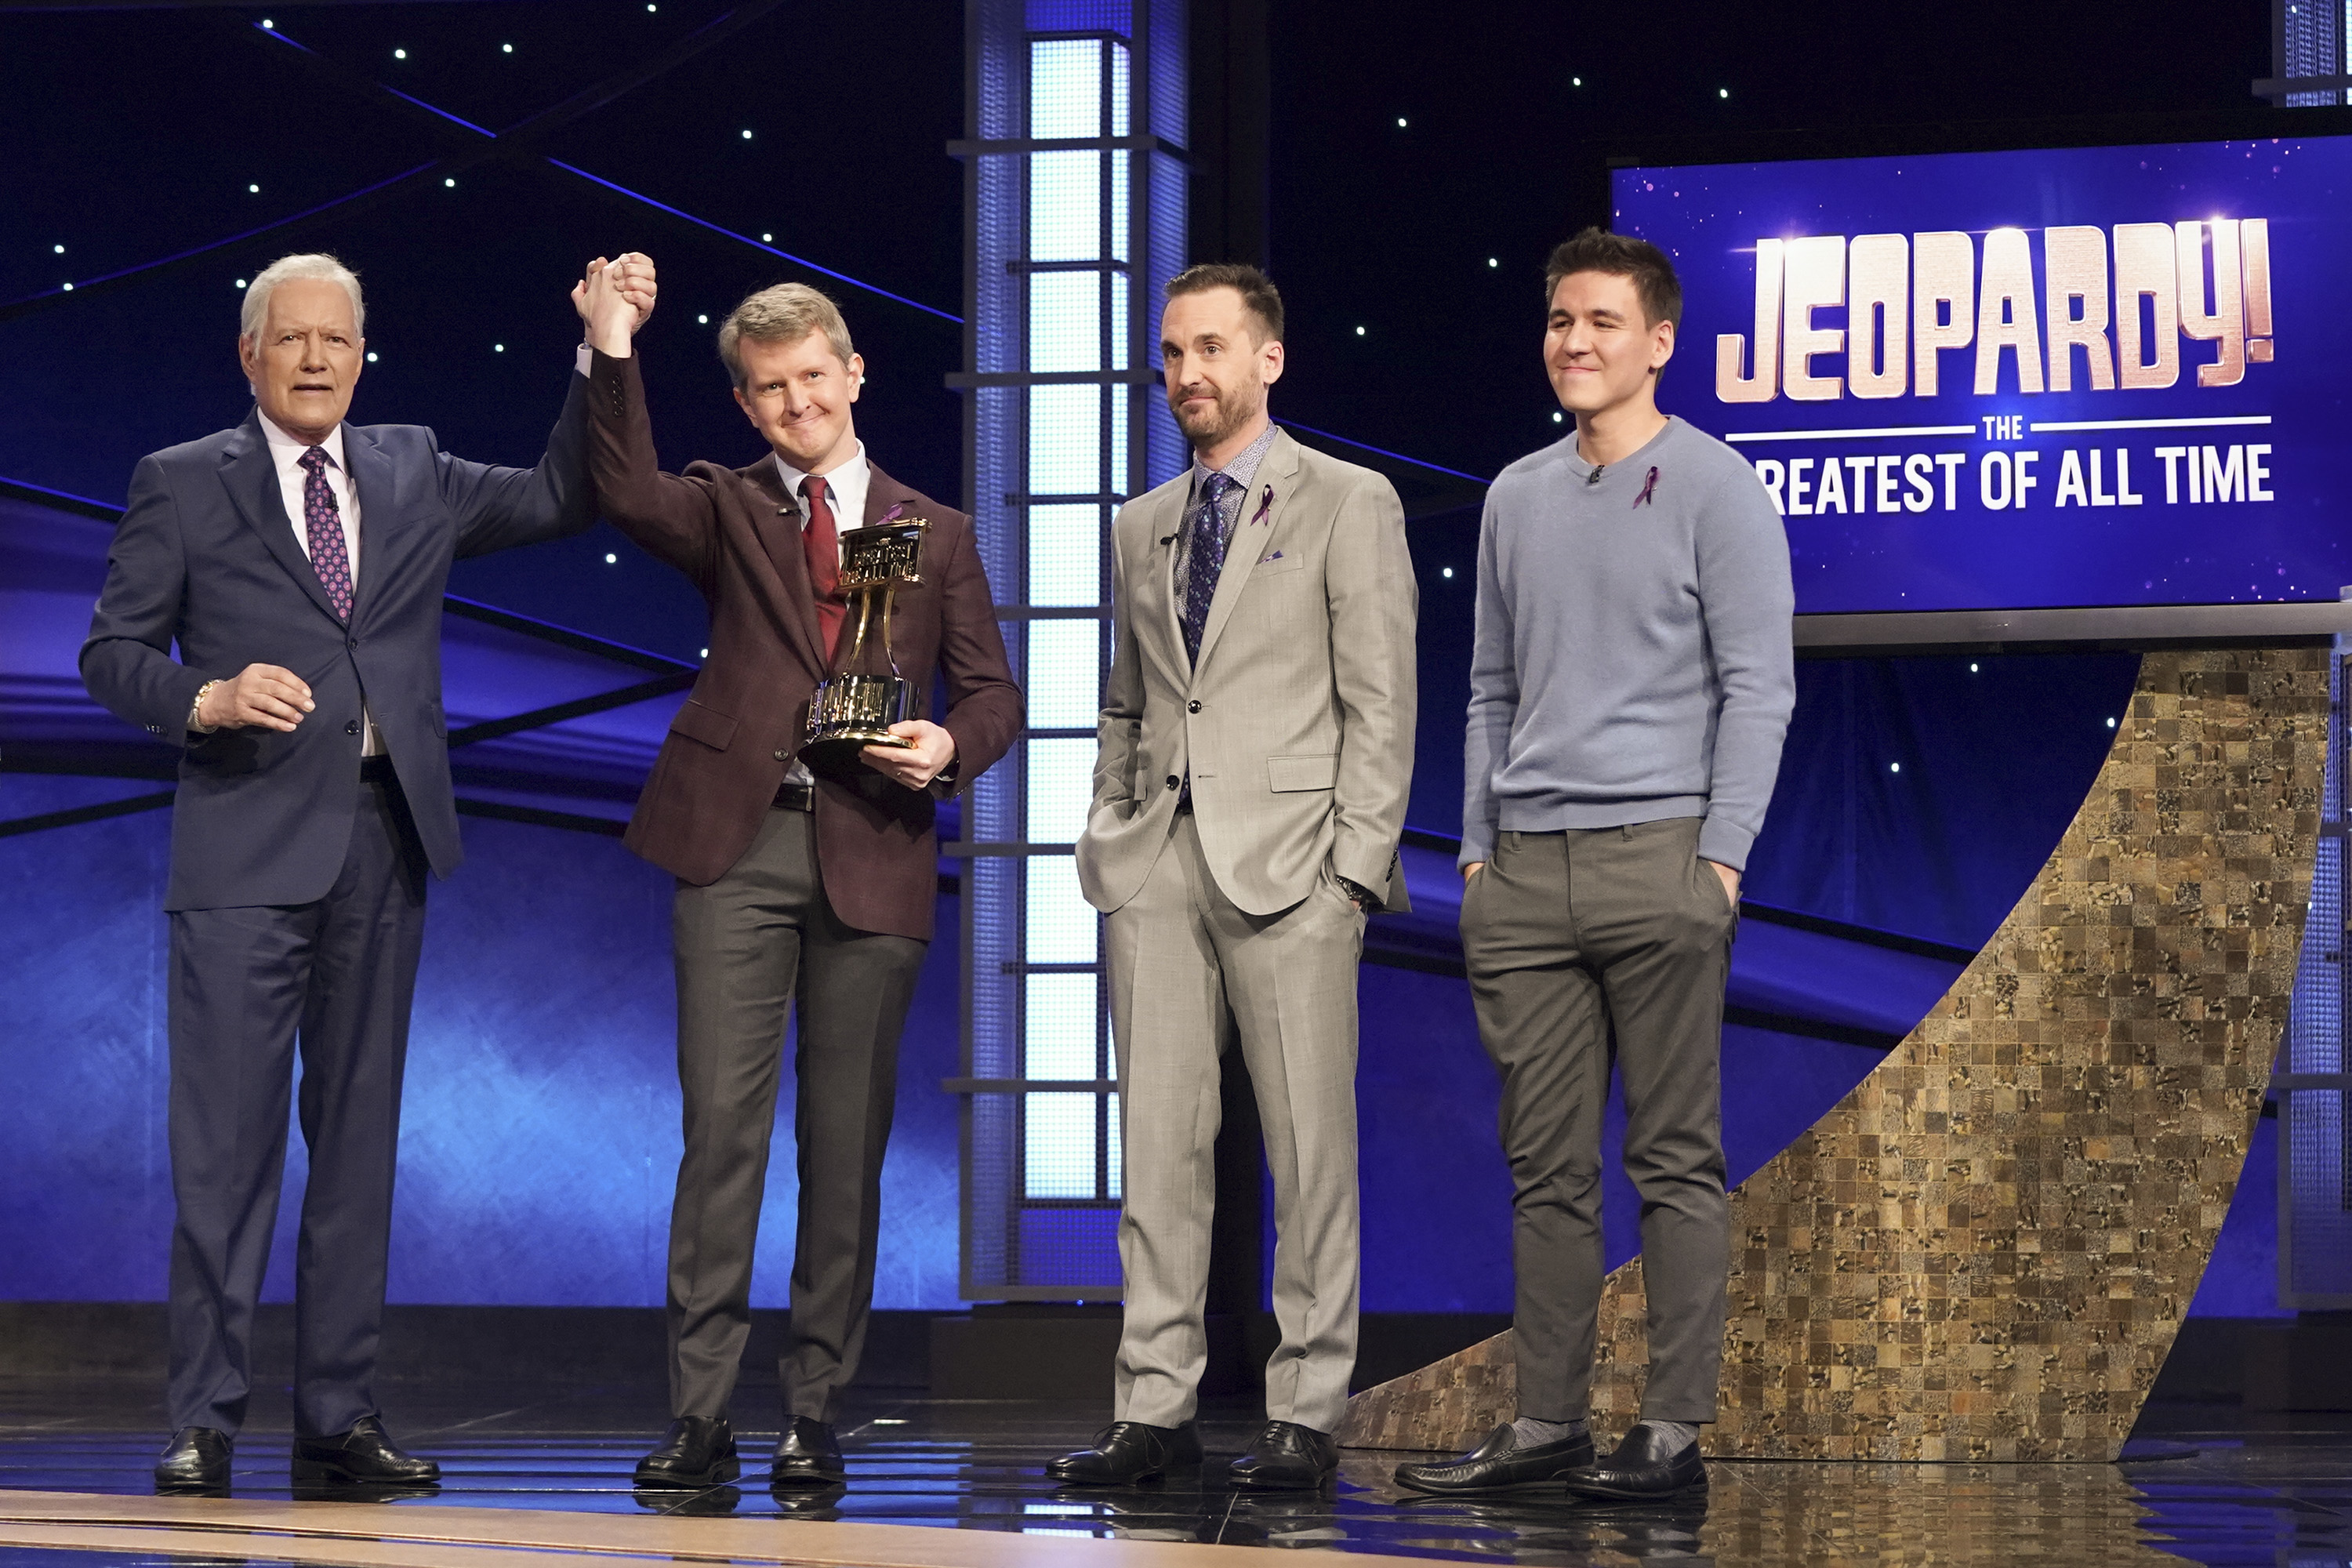 Ken Jennings, Brad Rutter, and James Holzhauer vied for the title of Greatest 'Jeopardy!' Player of All Time, pictured here with (far left) host Alex Trebek in Jan. 2020